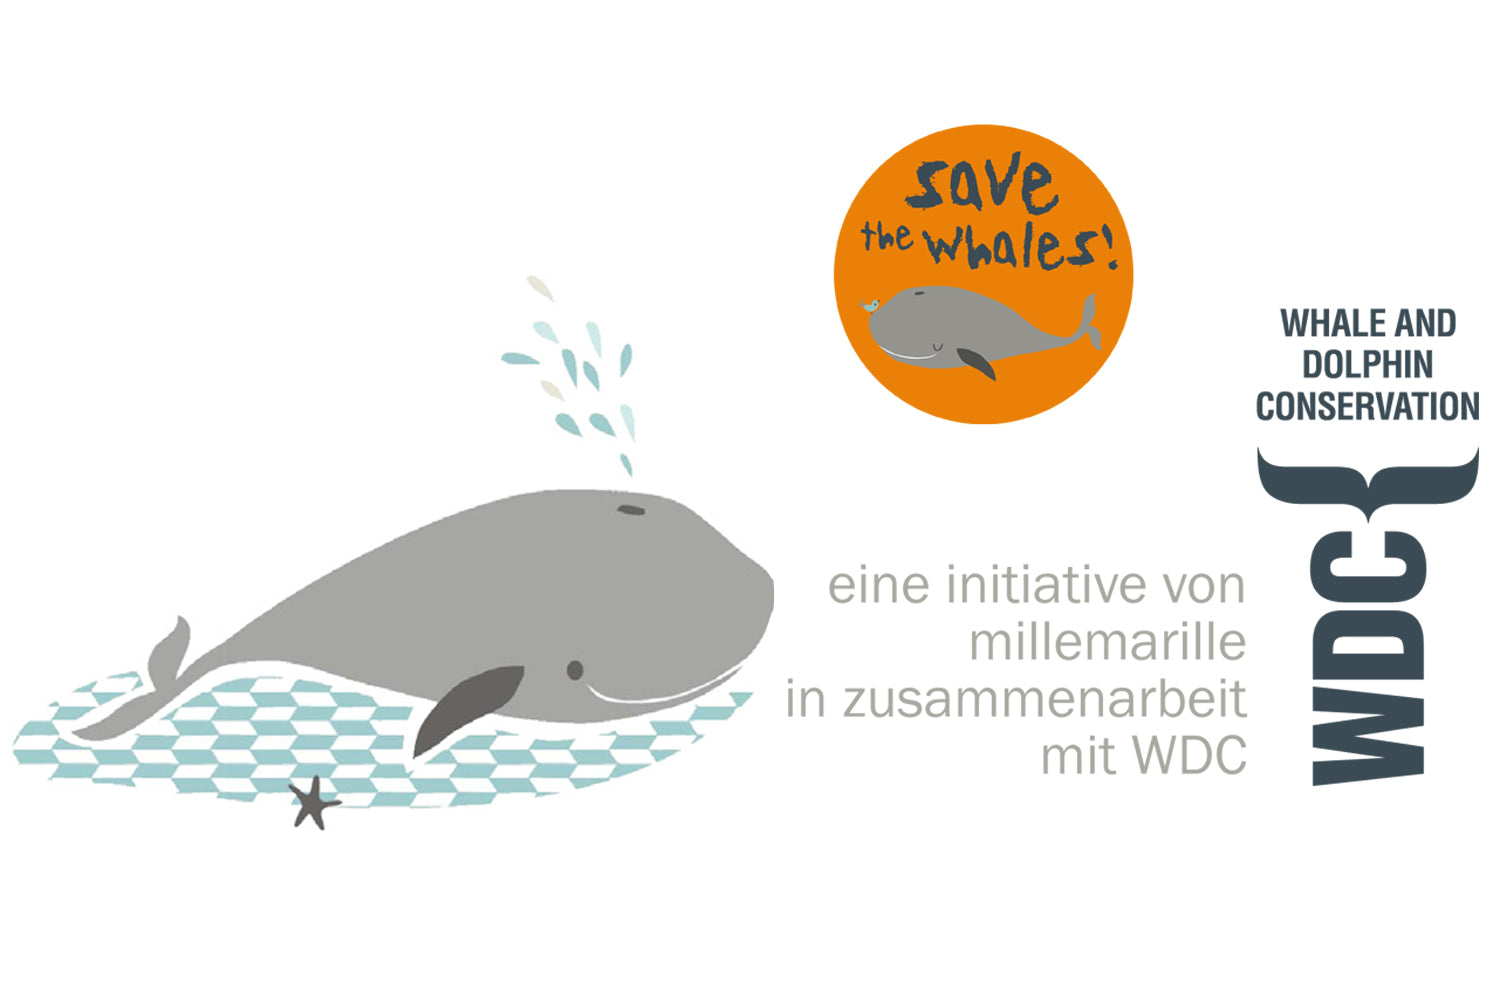 Bedding SAVE THE WHALES